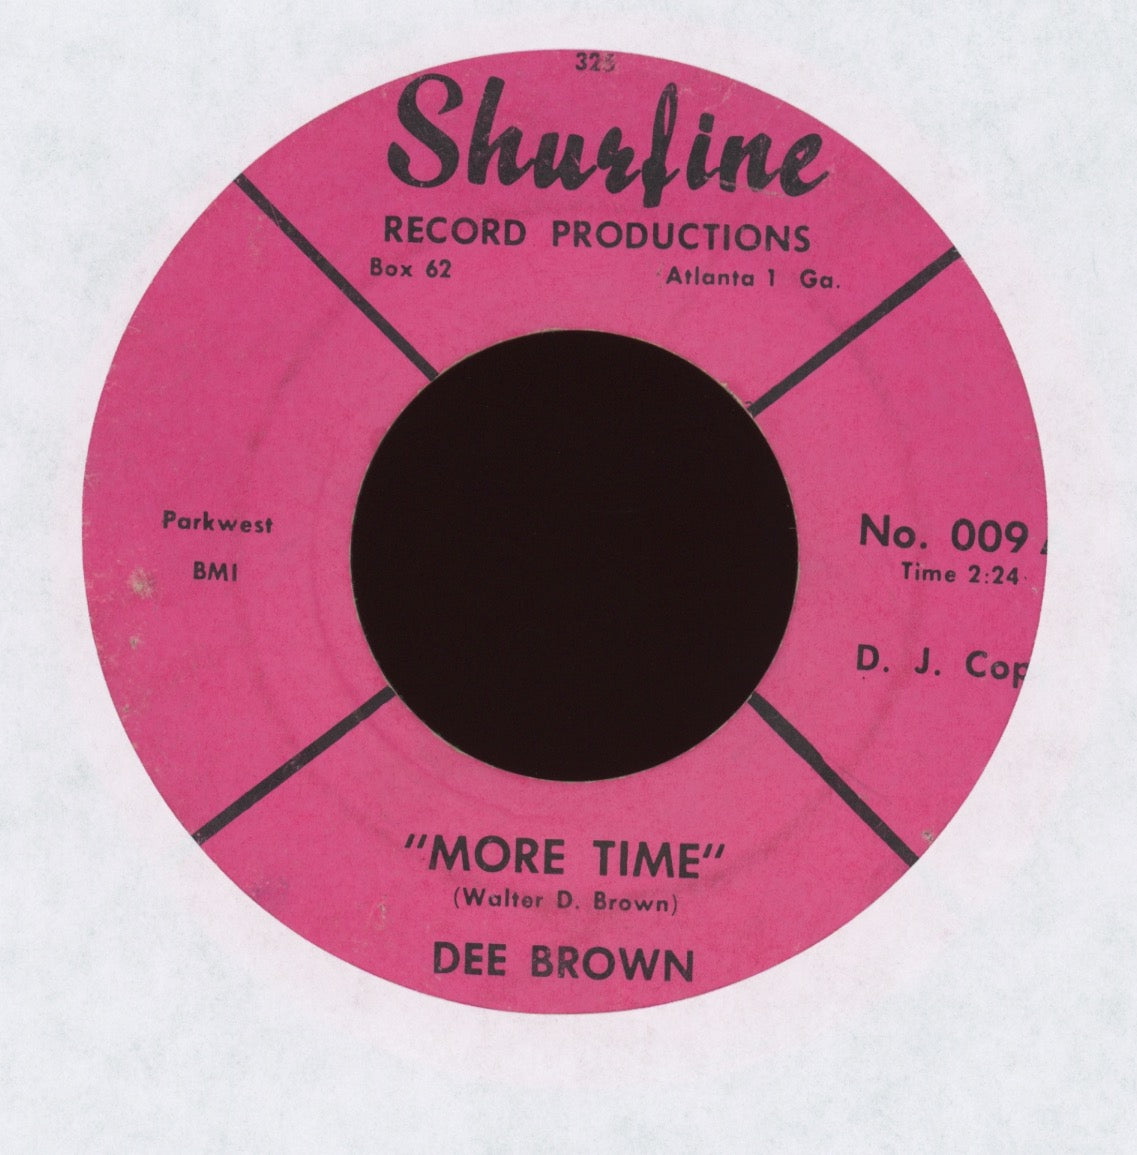 Dee Brown - More Time on Shurfine